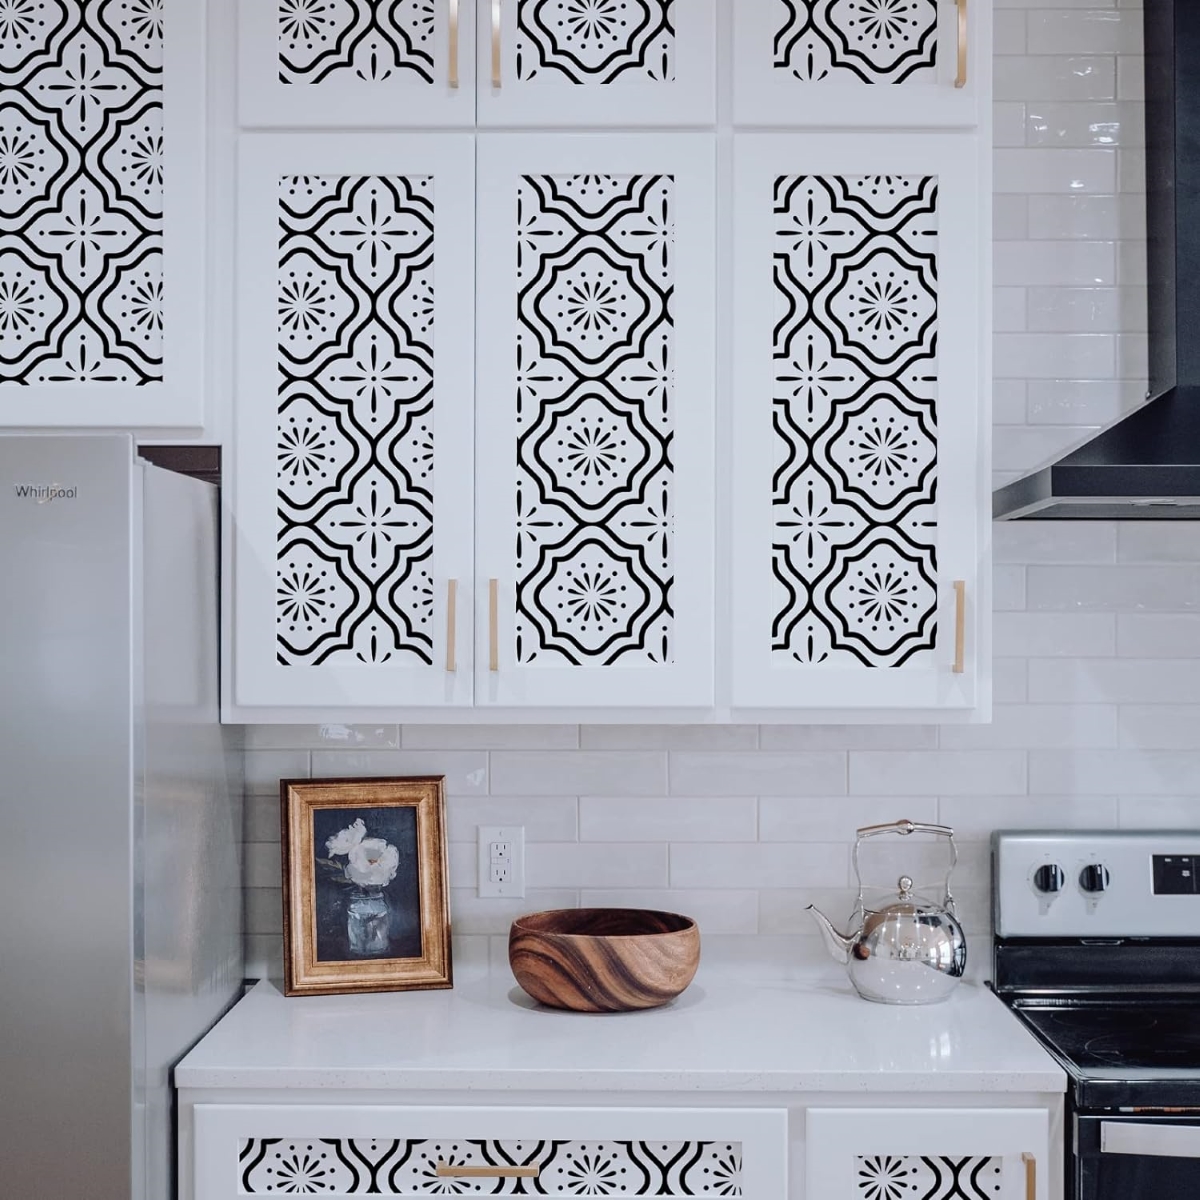 A fun wallpaper is applied to the center of each kitchen cabinet door.